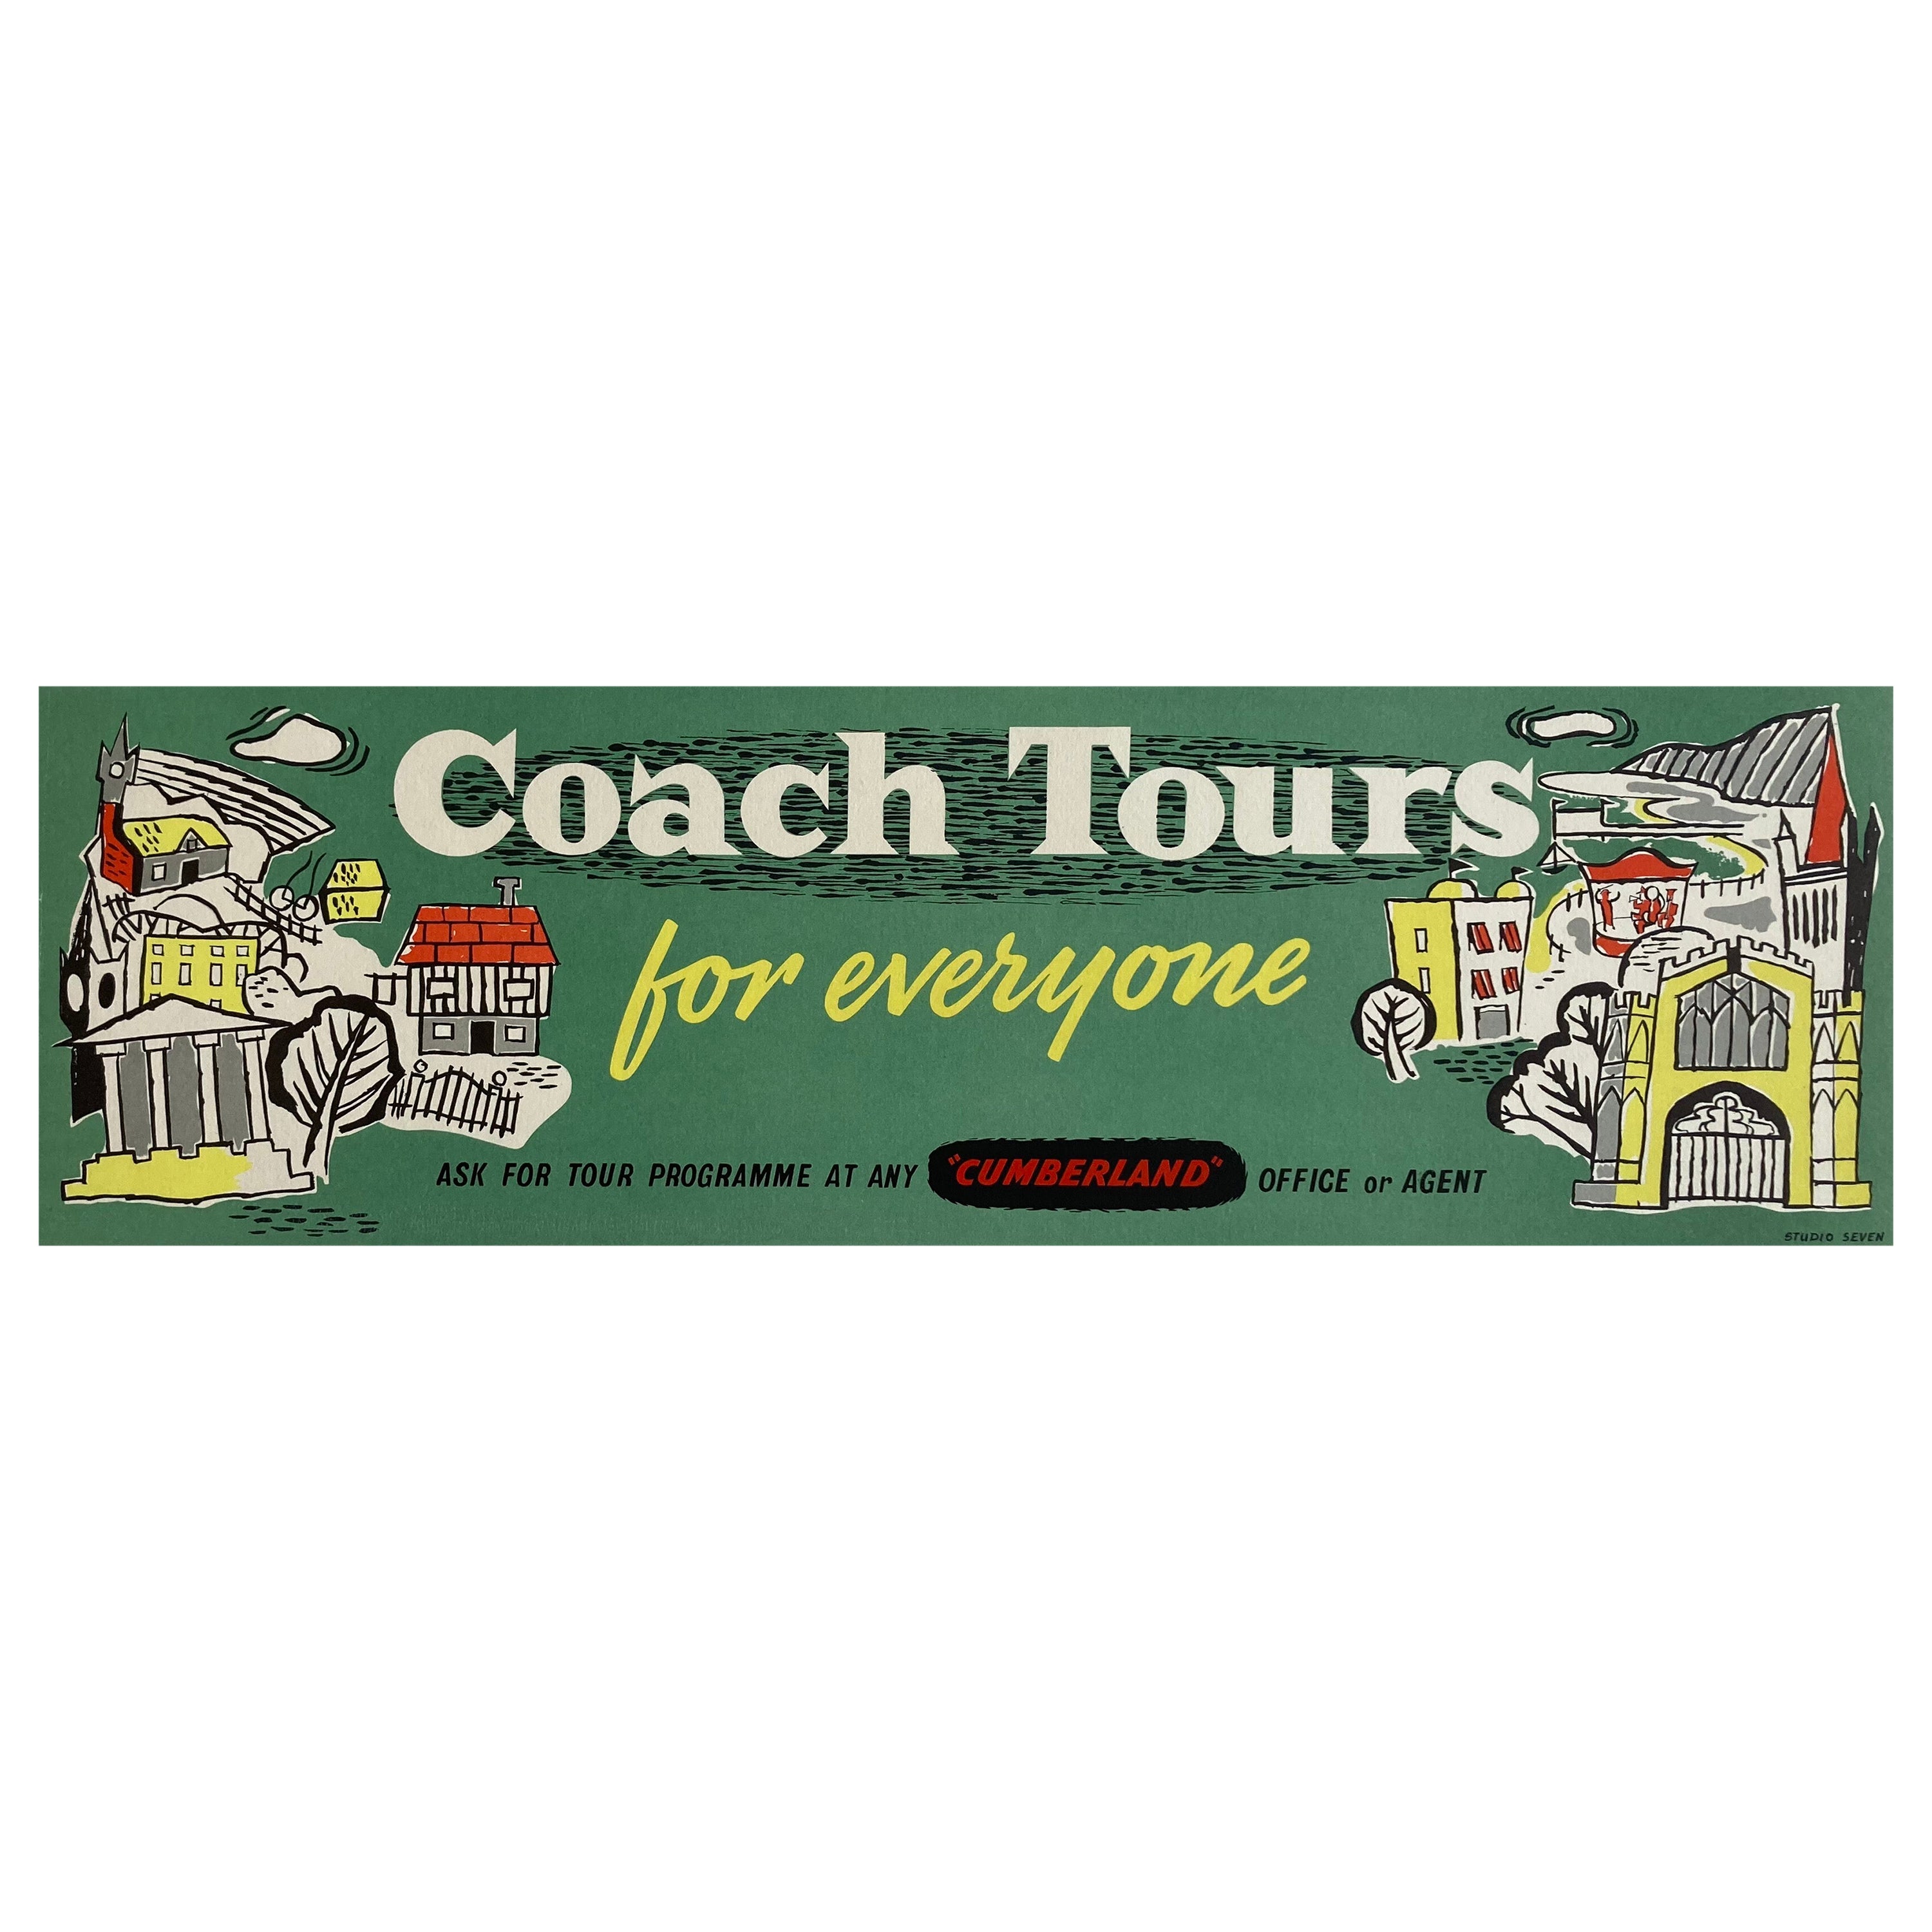 1960's Coach Travel Poster by Studio Seven